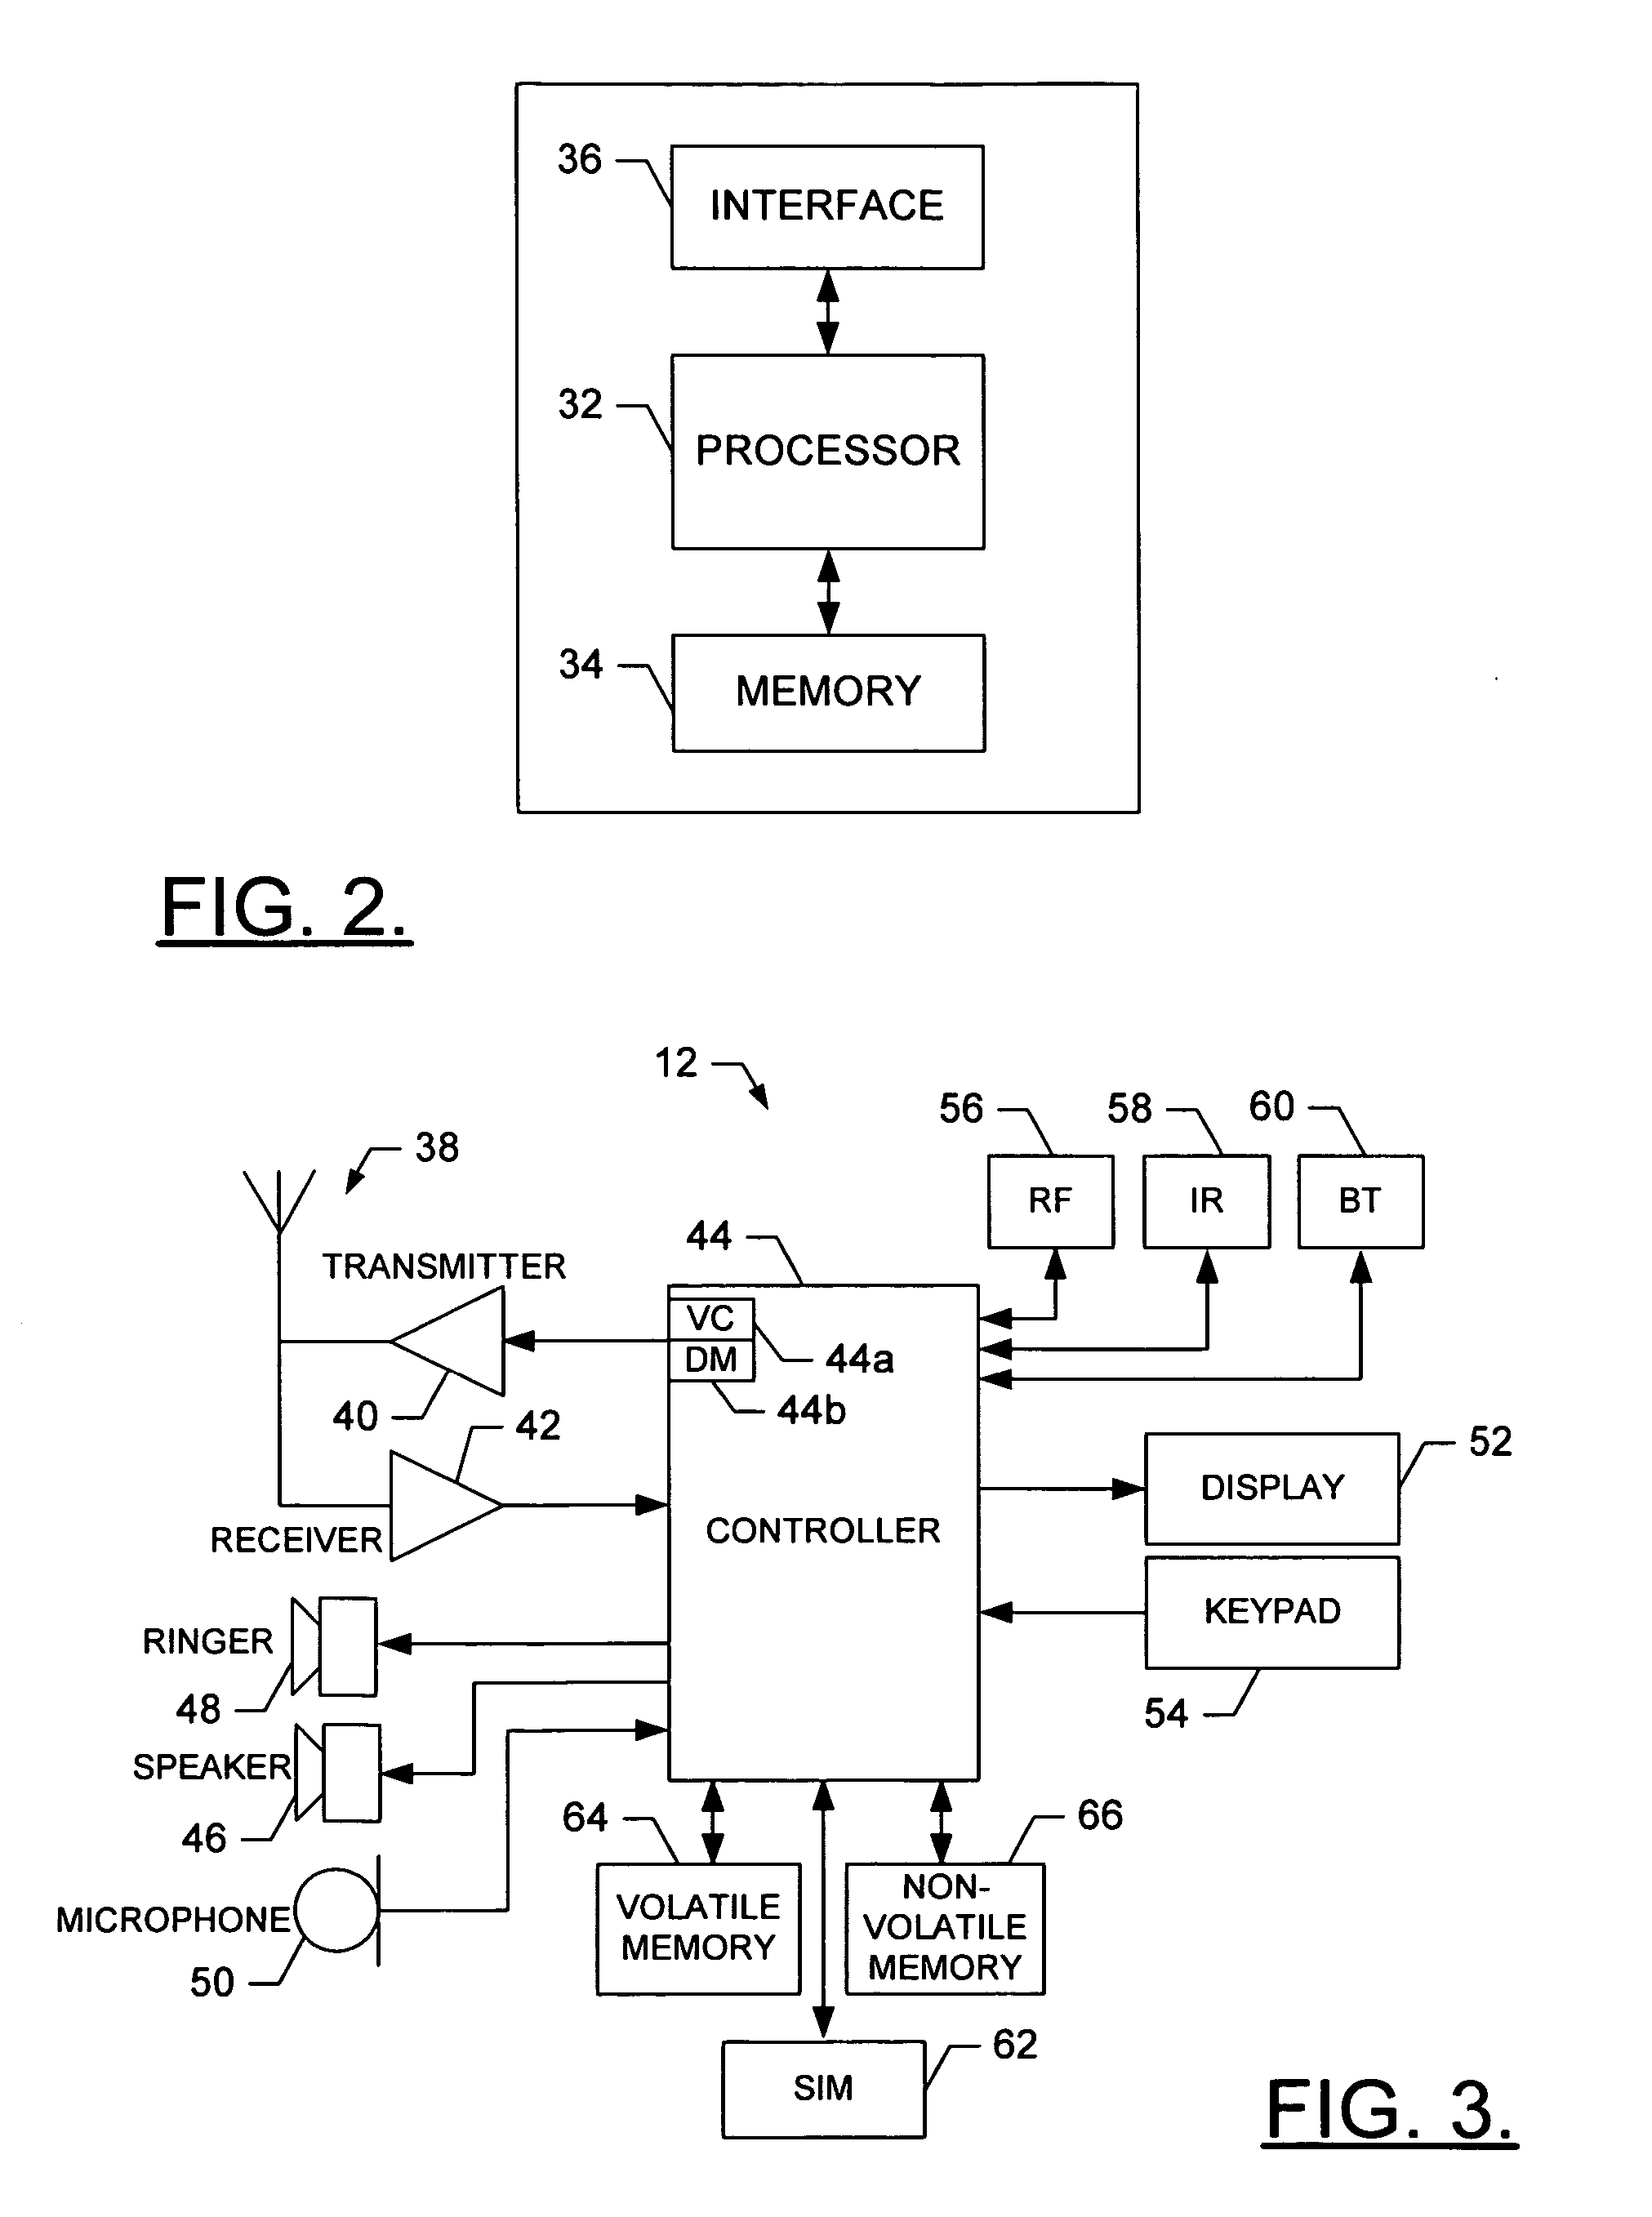 System and method for service discovery during connection setup in a wireless environment